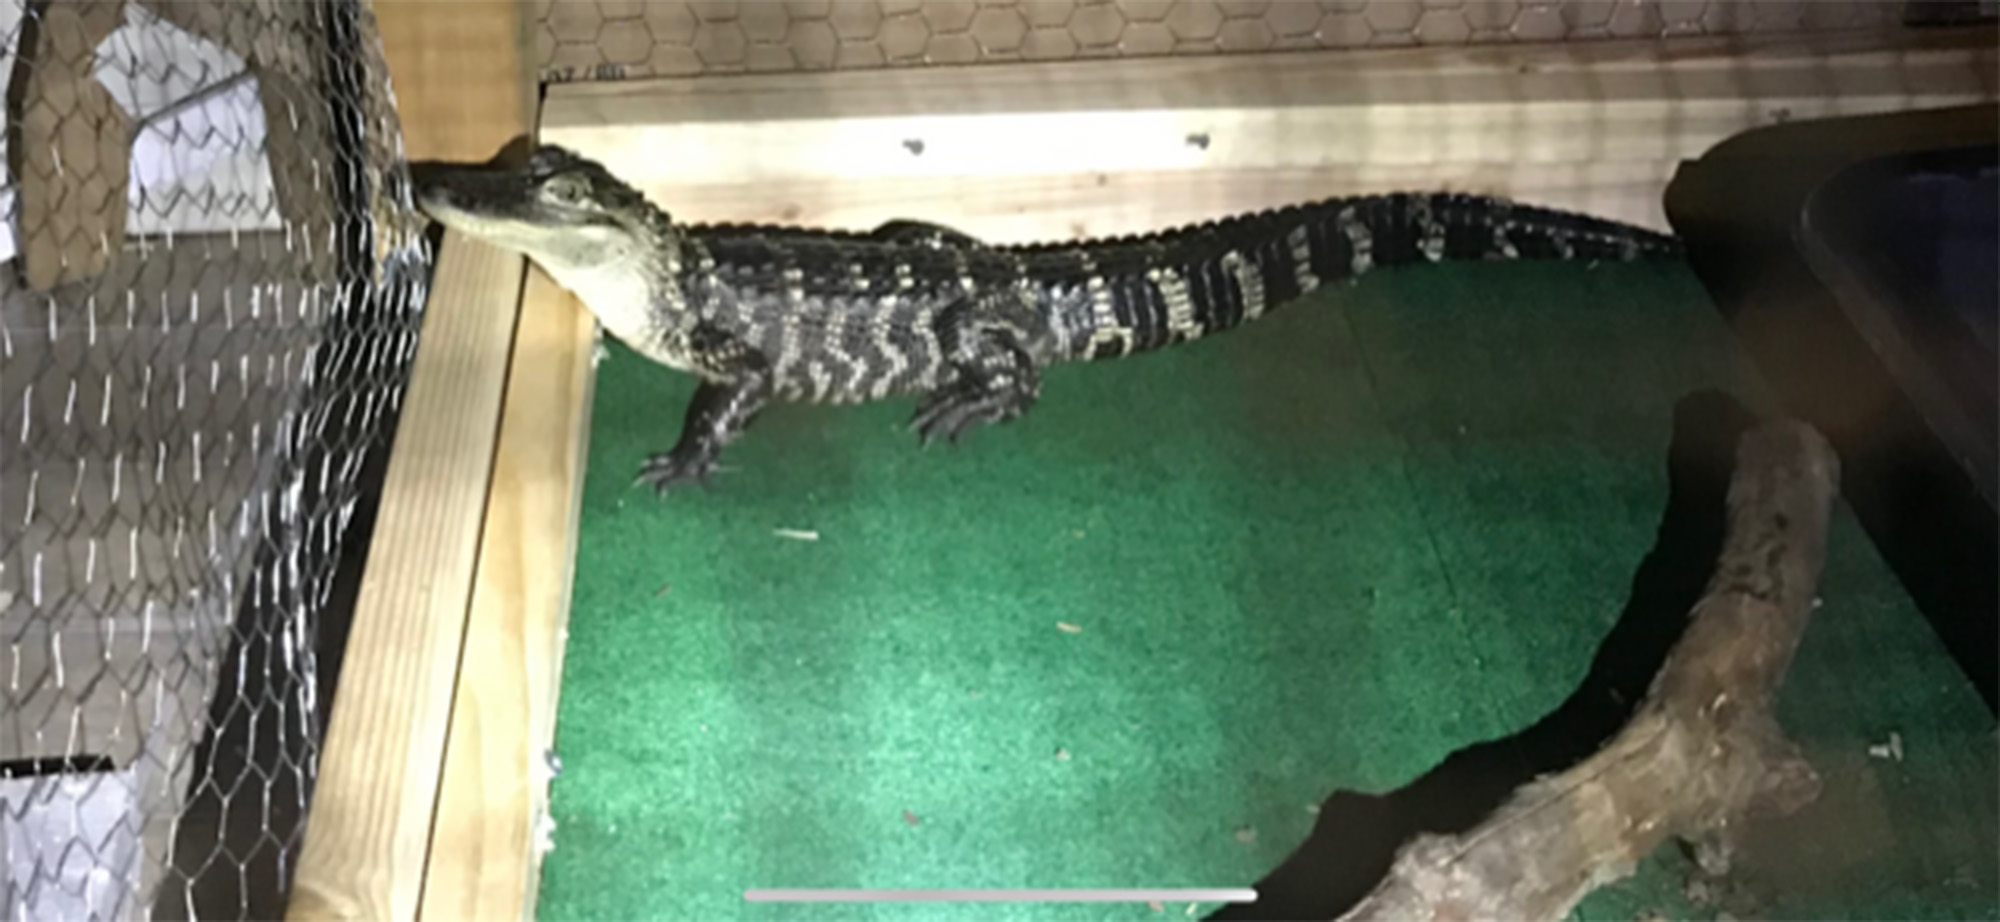 PHOTO: Authorities found an alligator living in the kitchen of a residence in South Coatesville, Penn., Feb. 8, 2019.